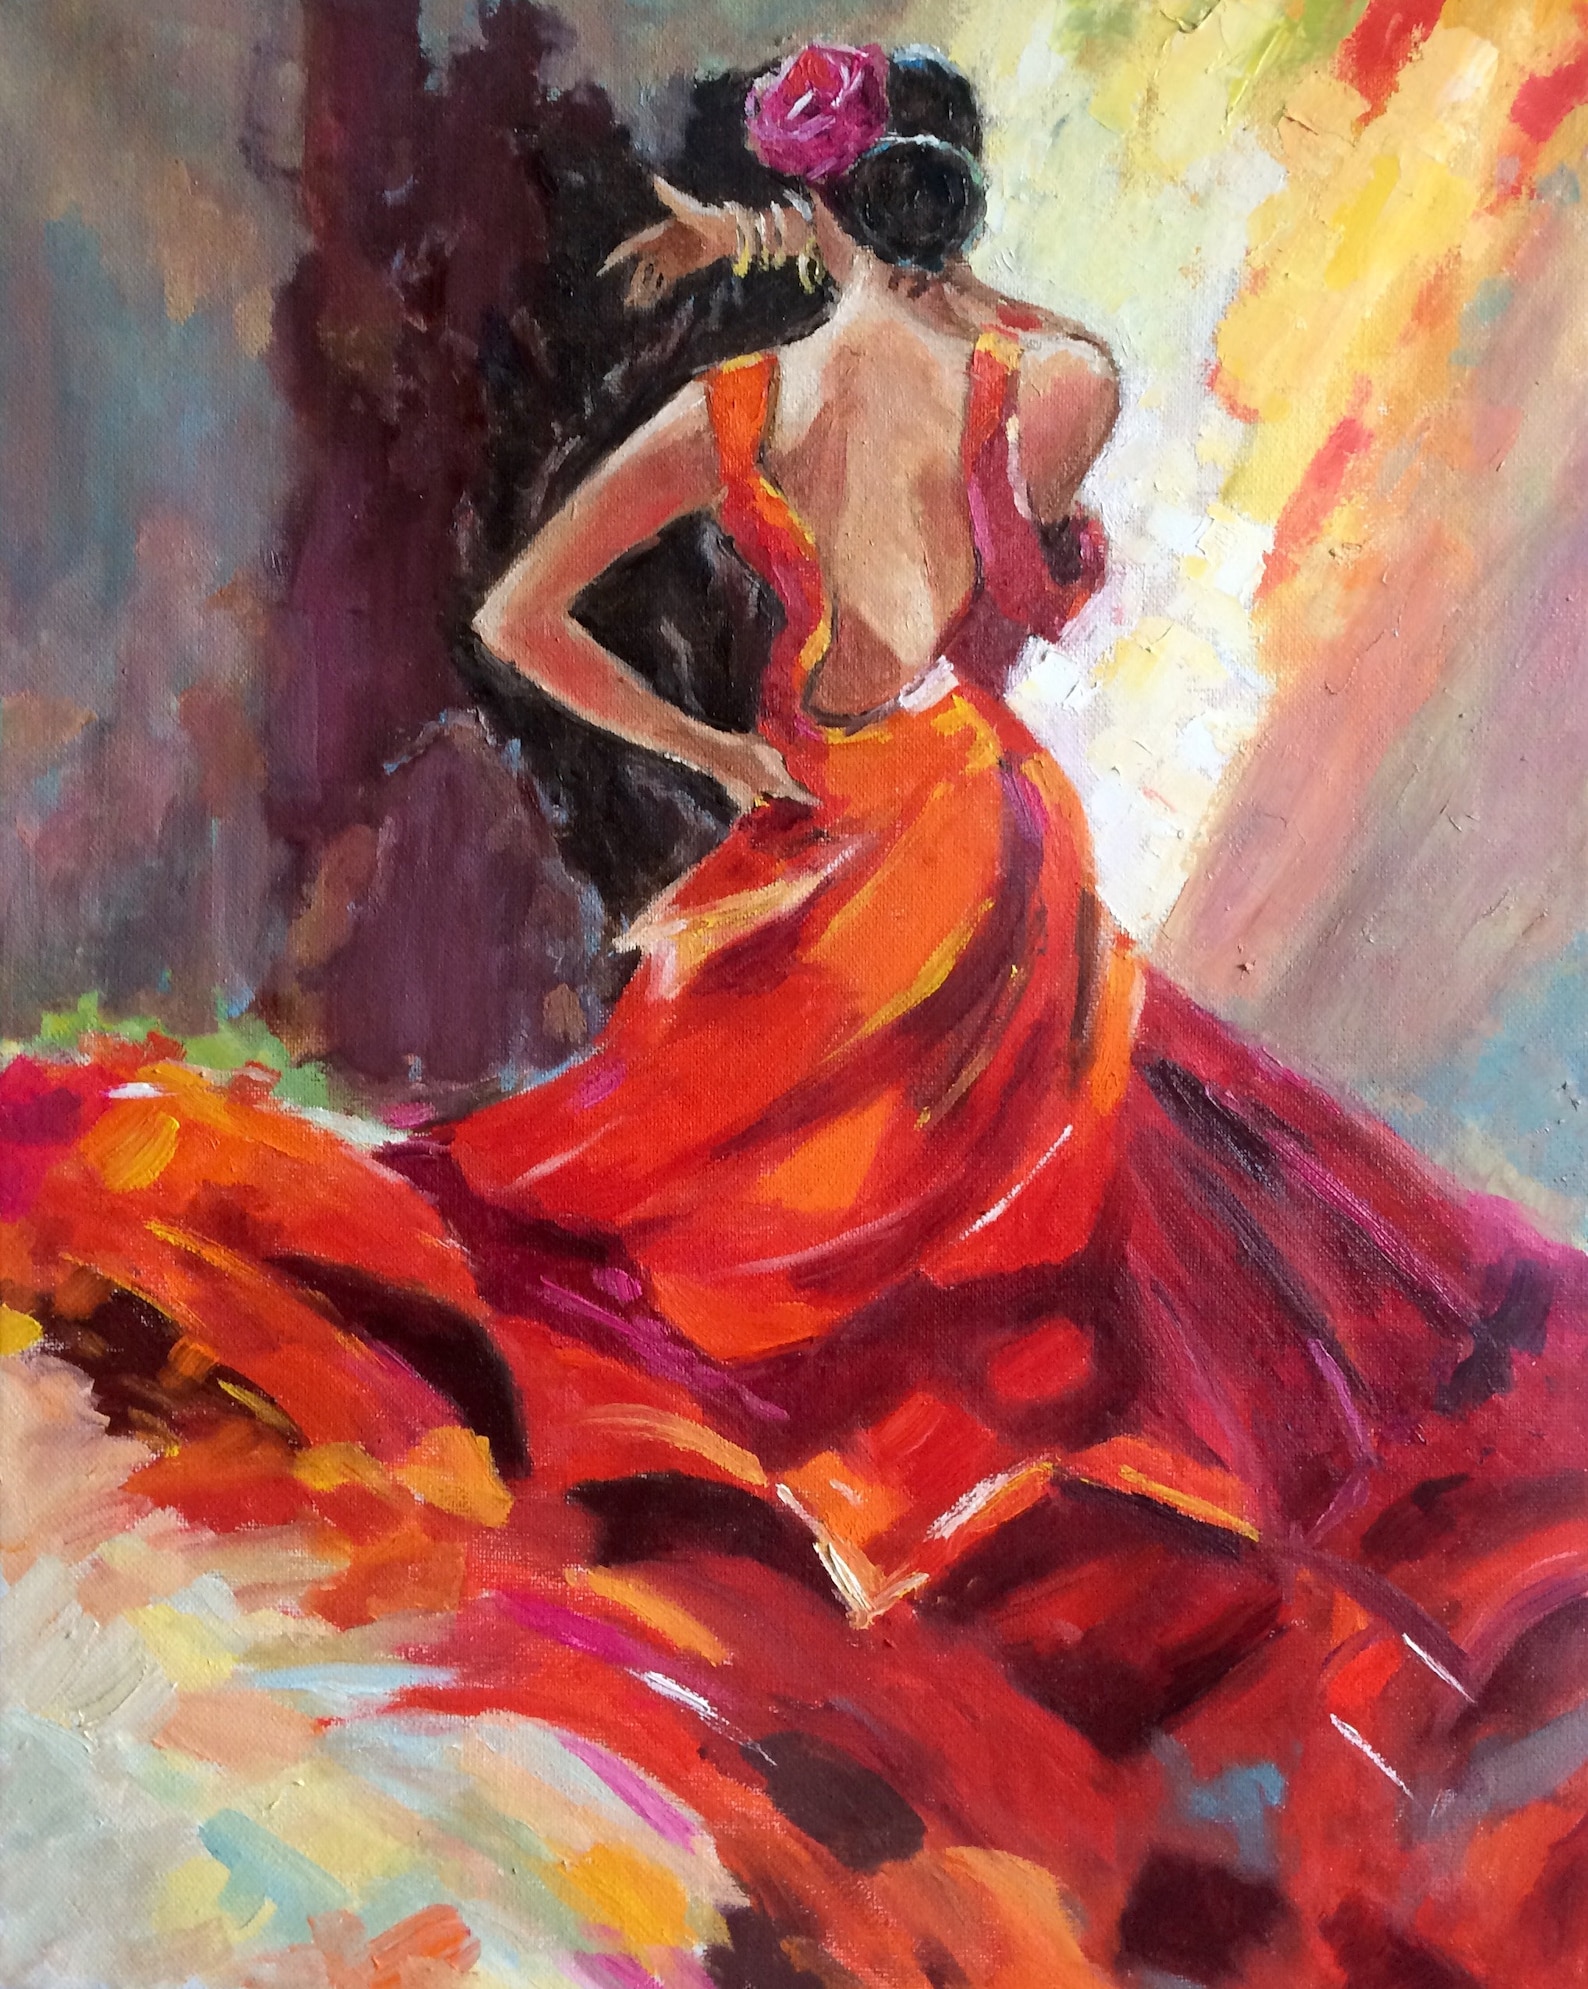 Flamenco Dancer Painting Original Oil Painting On Canvas Etsy